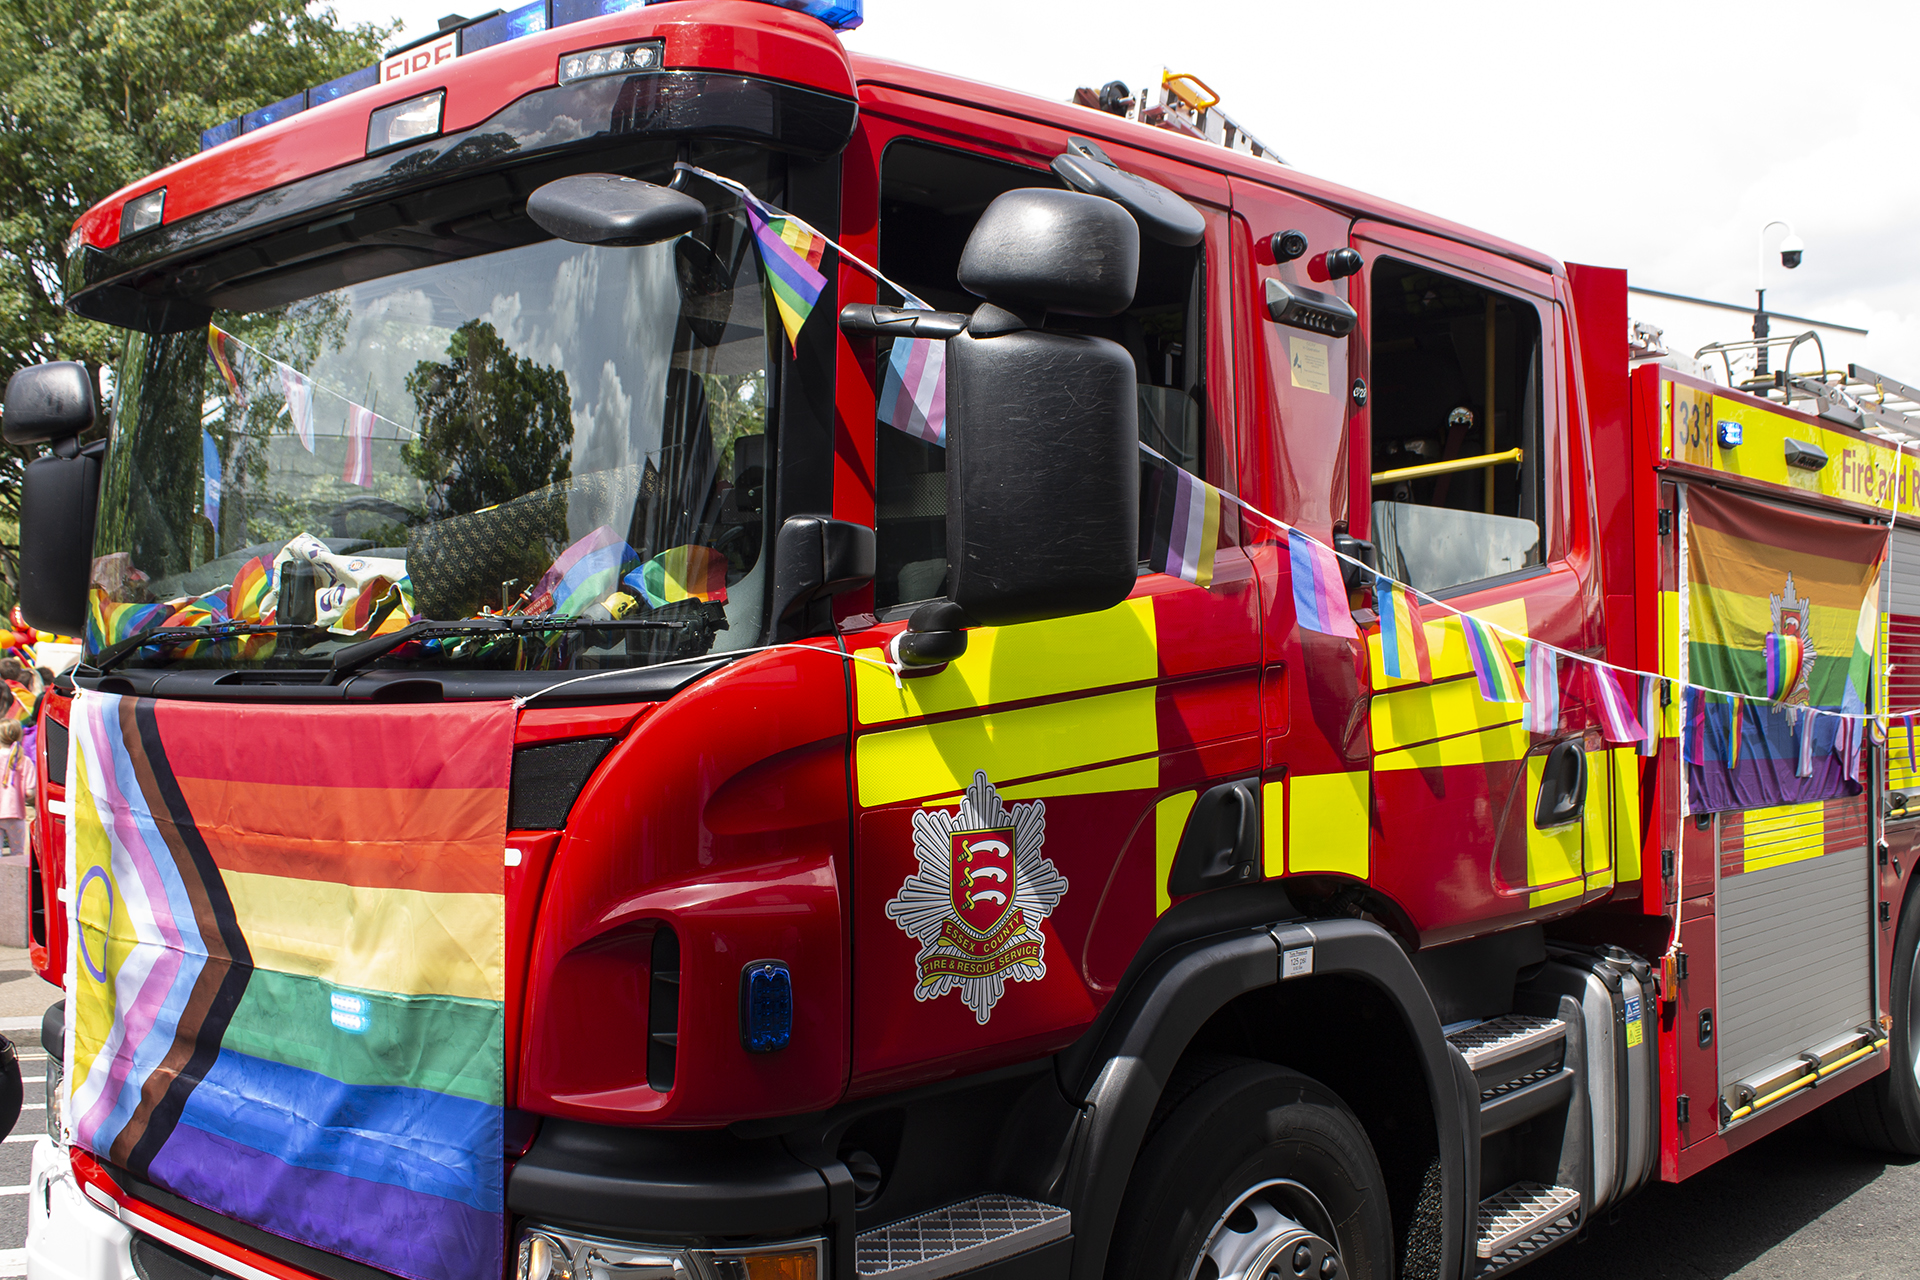 Fire engine decorated with rainbow bunting and flag for pride. 